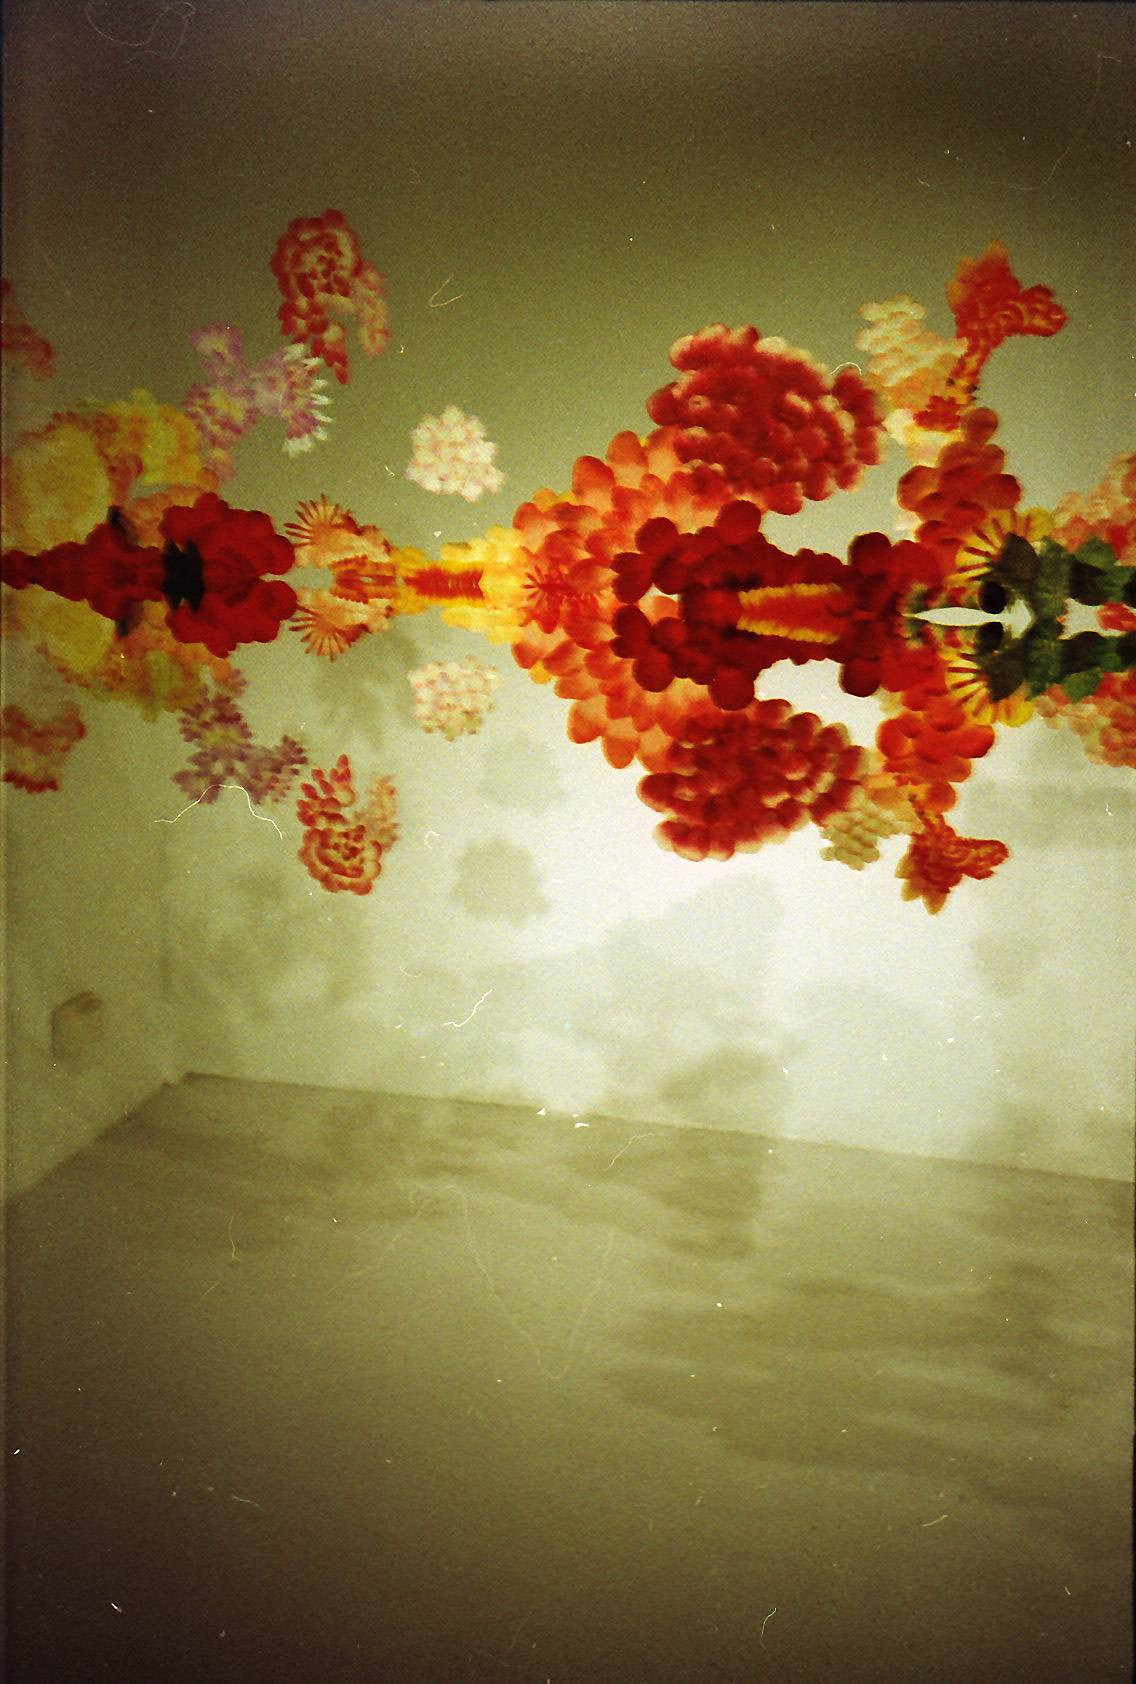 27 Famous Beta Plant Vase 2024 free download beta plant vase of trans cool tokyo 19 november 2010 to 13 february 2011 ac2b7 lomography with regard to artificial flower metals kojin creates dreamy interpretations of reality stimulating 